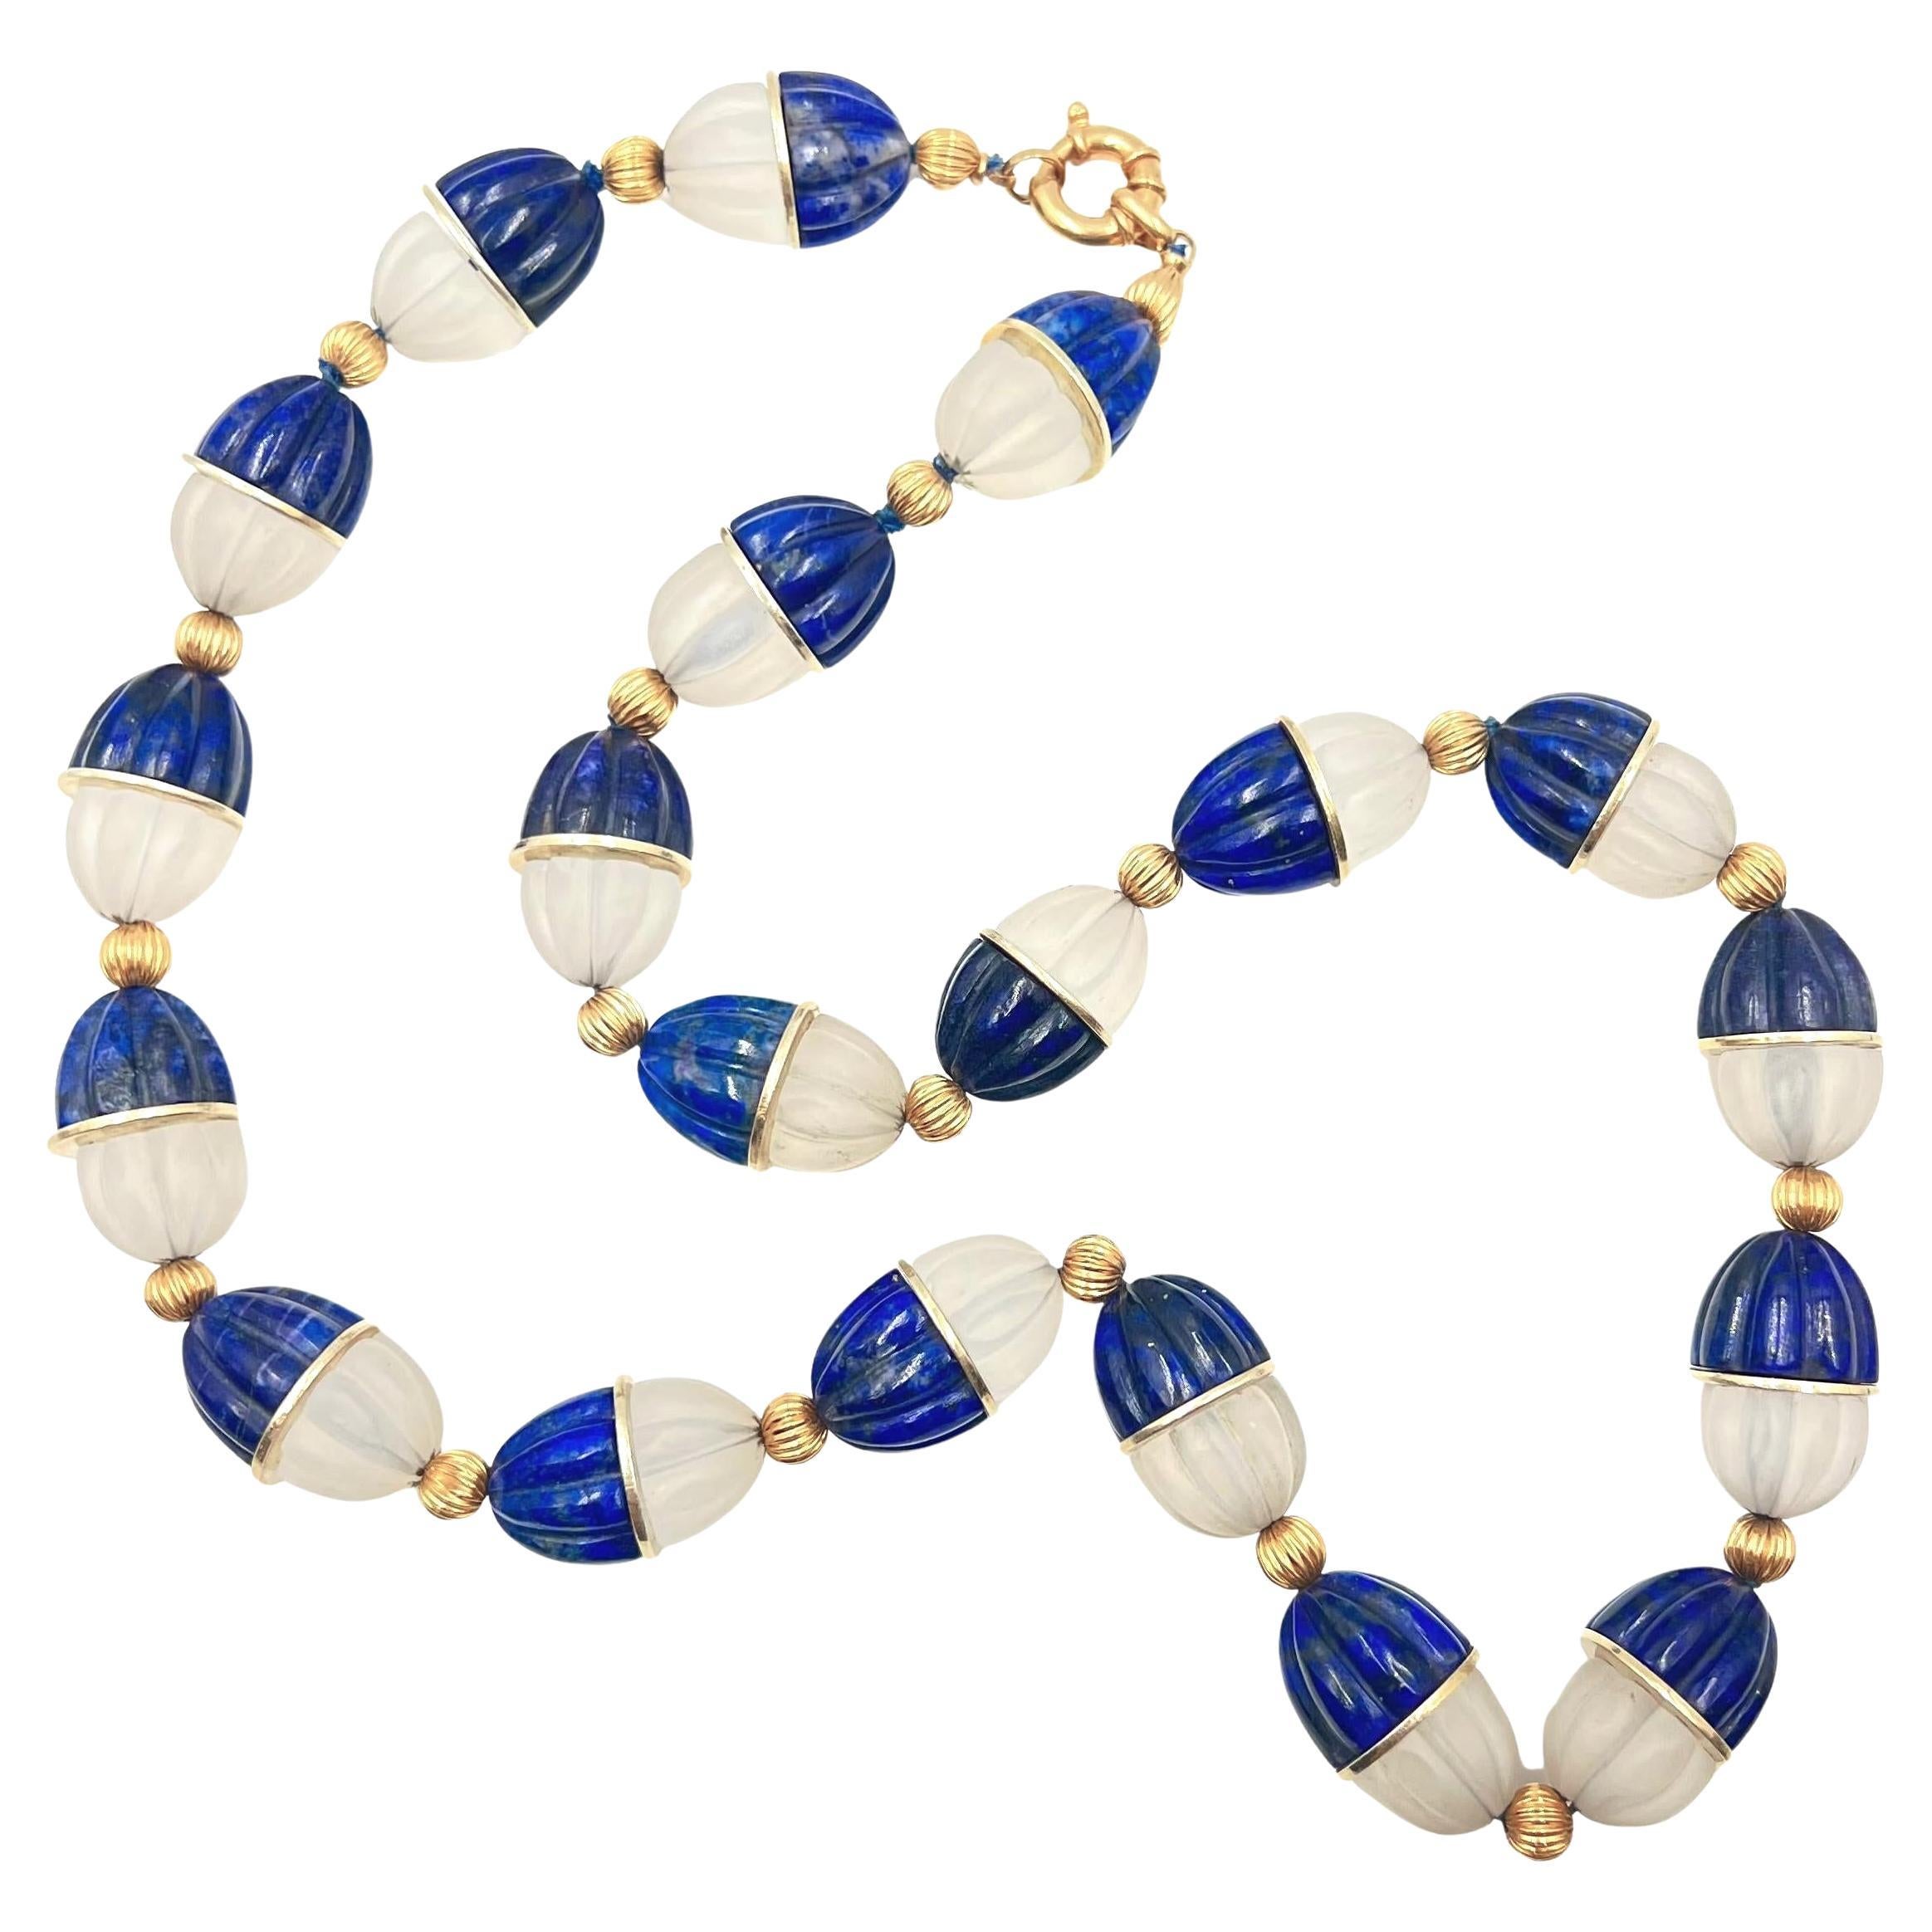 Bead necklace, composed of twenty half carved lapis lazuli and half carved frosted rock crystal beads, the halves joined by a central flat yellow gold disk. In between each of these larger beads are smaller 6mm 14k yellow gold fluted beads.  14k